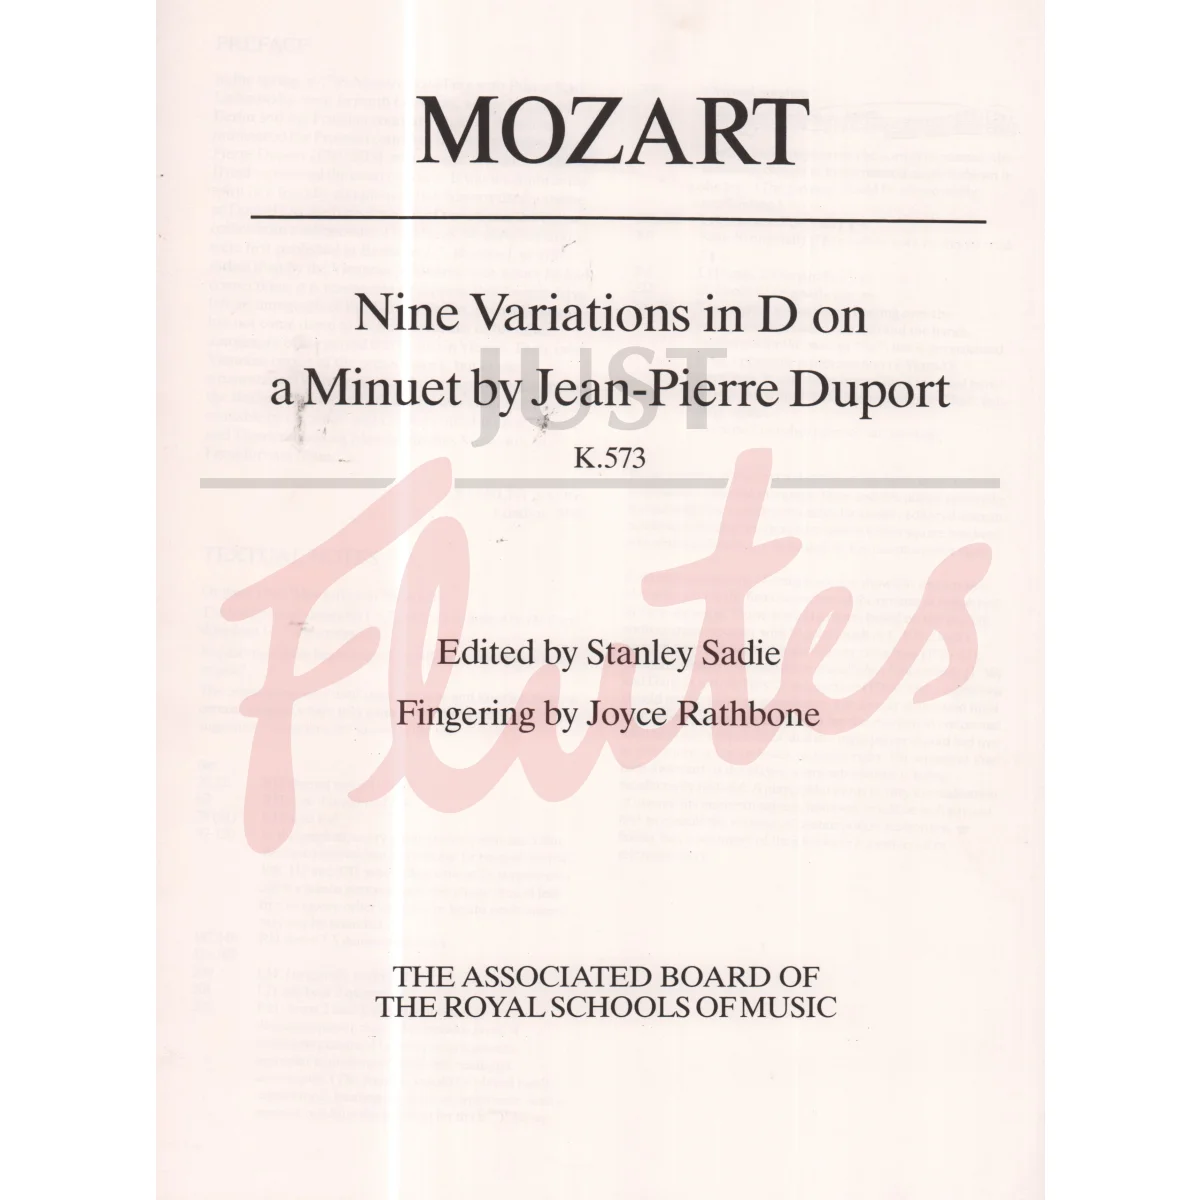 Nine Variations in D on a Minuet by Jean-Pierre Duport